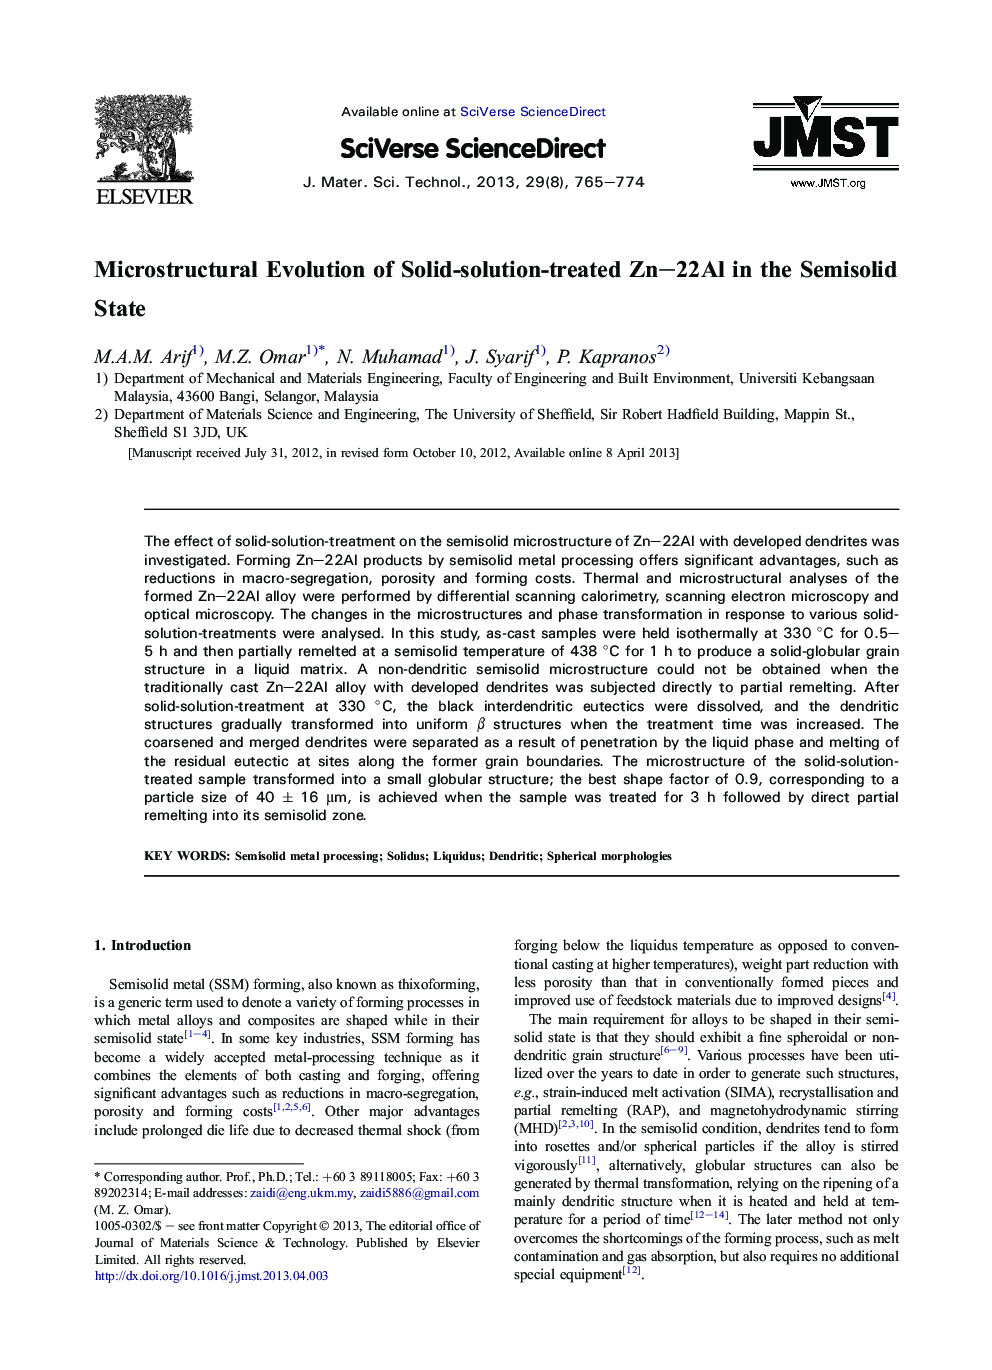 Microstructural Evolution of Solid-solution-treated Zn-22Al in the Semisolid State